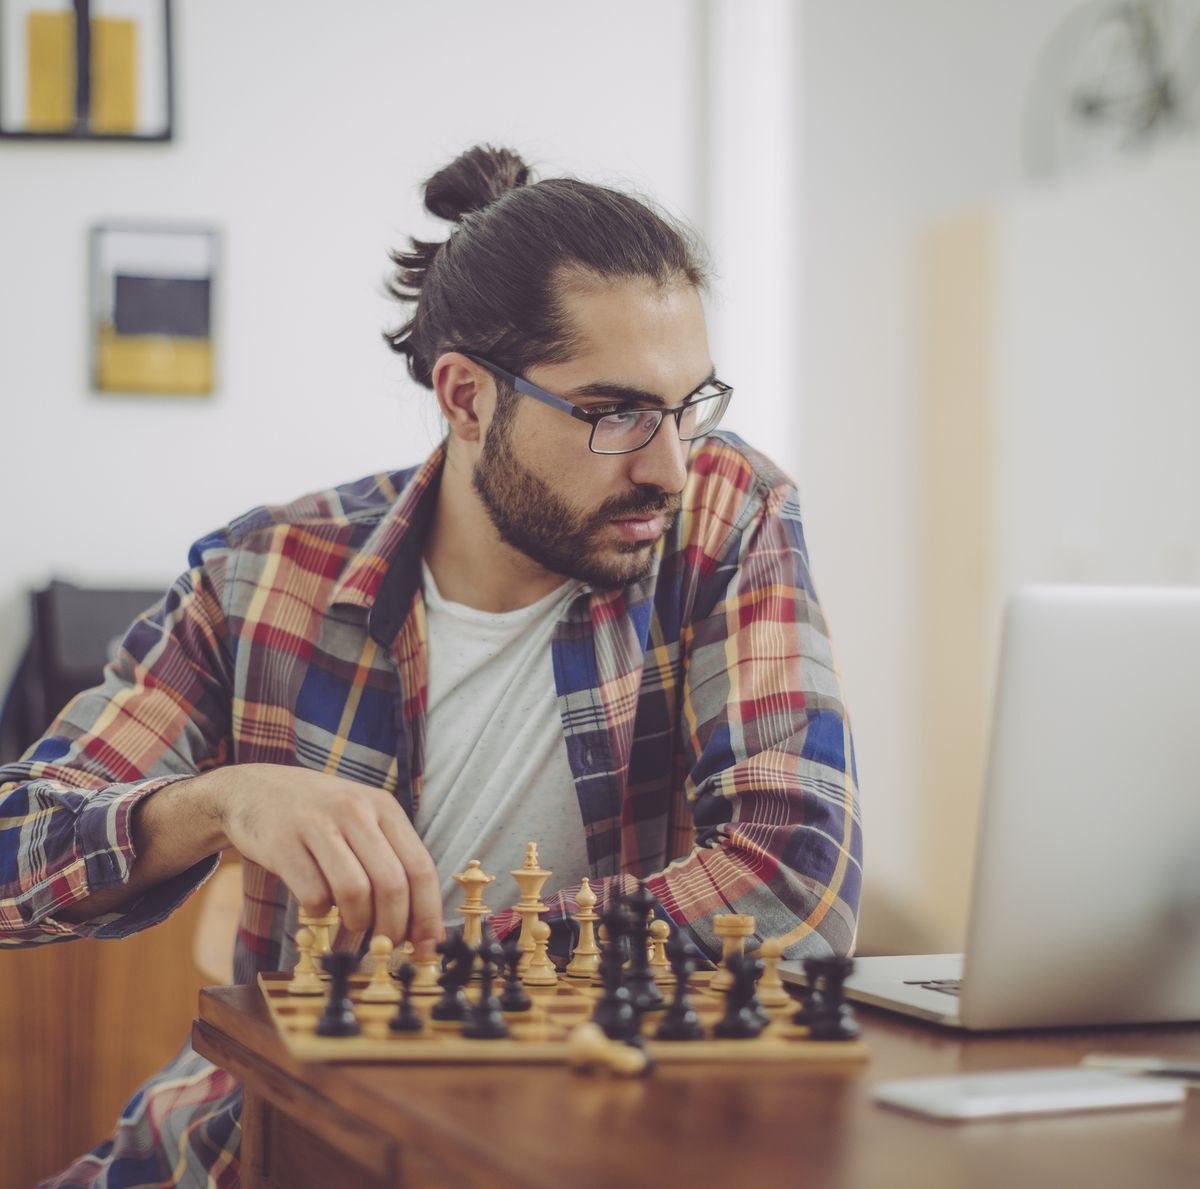 CHESS. Play chess online for free against real human players